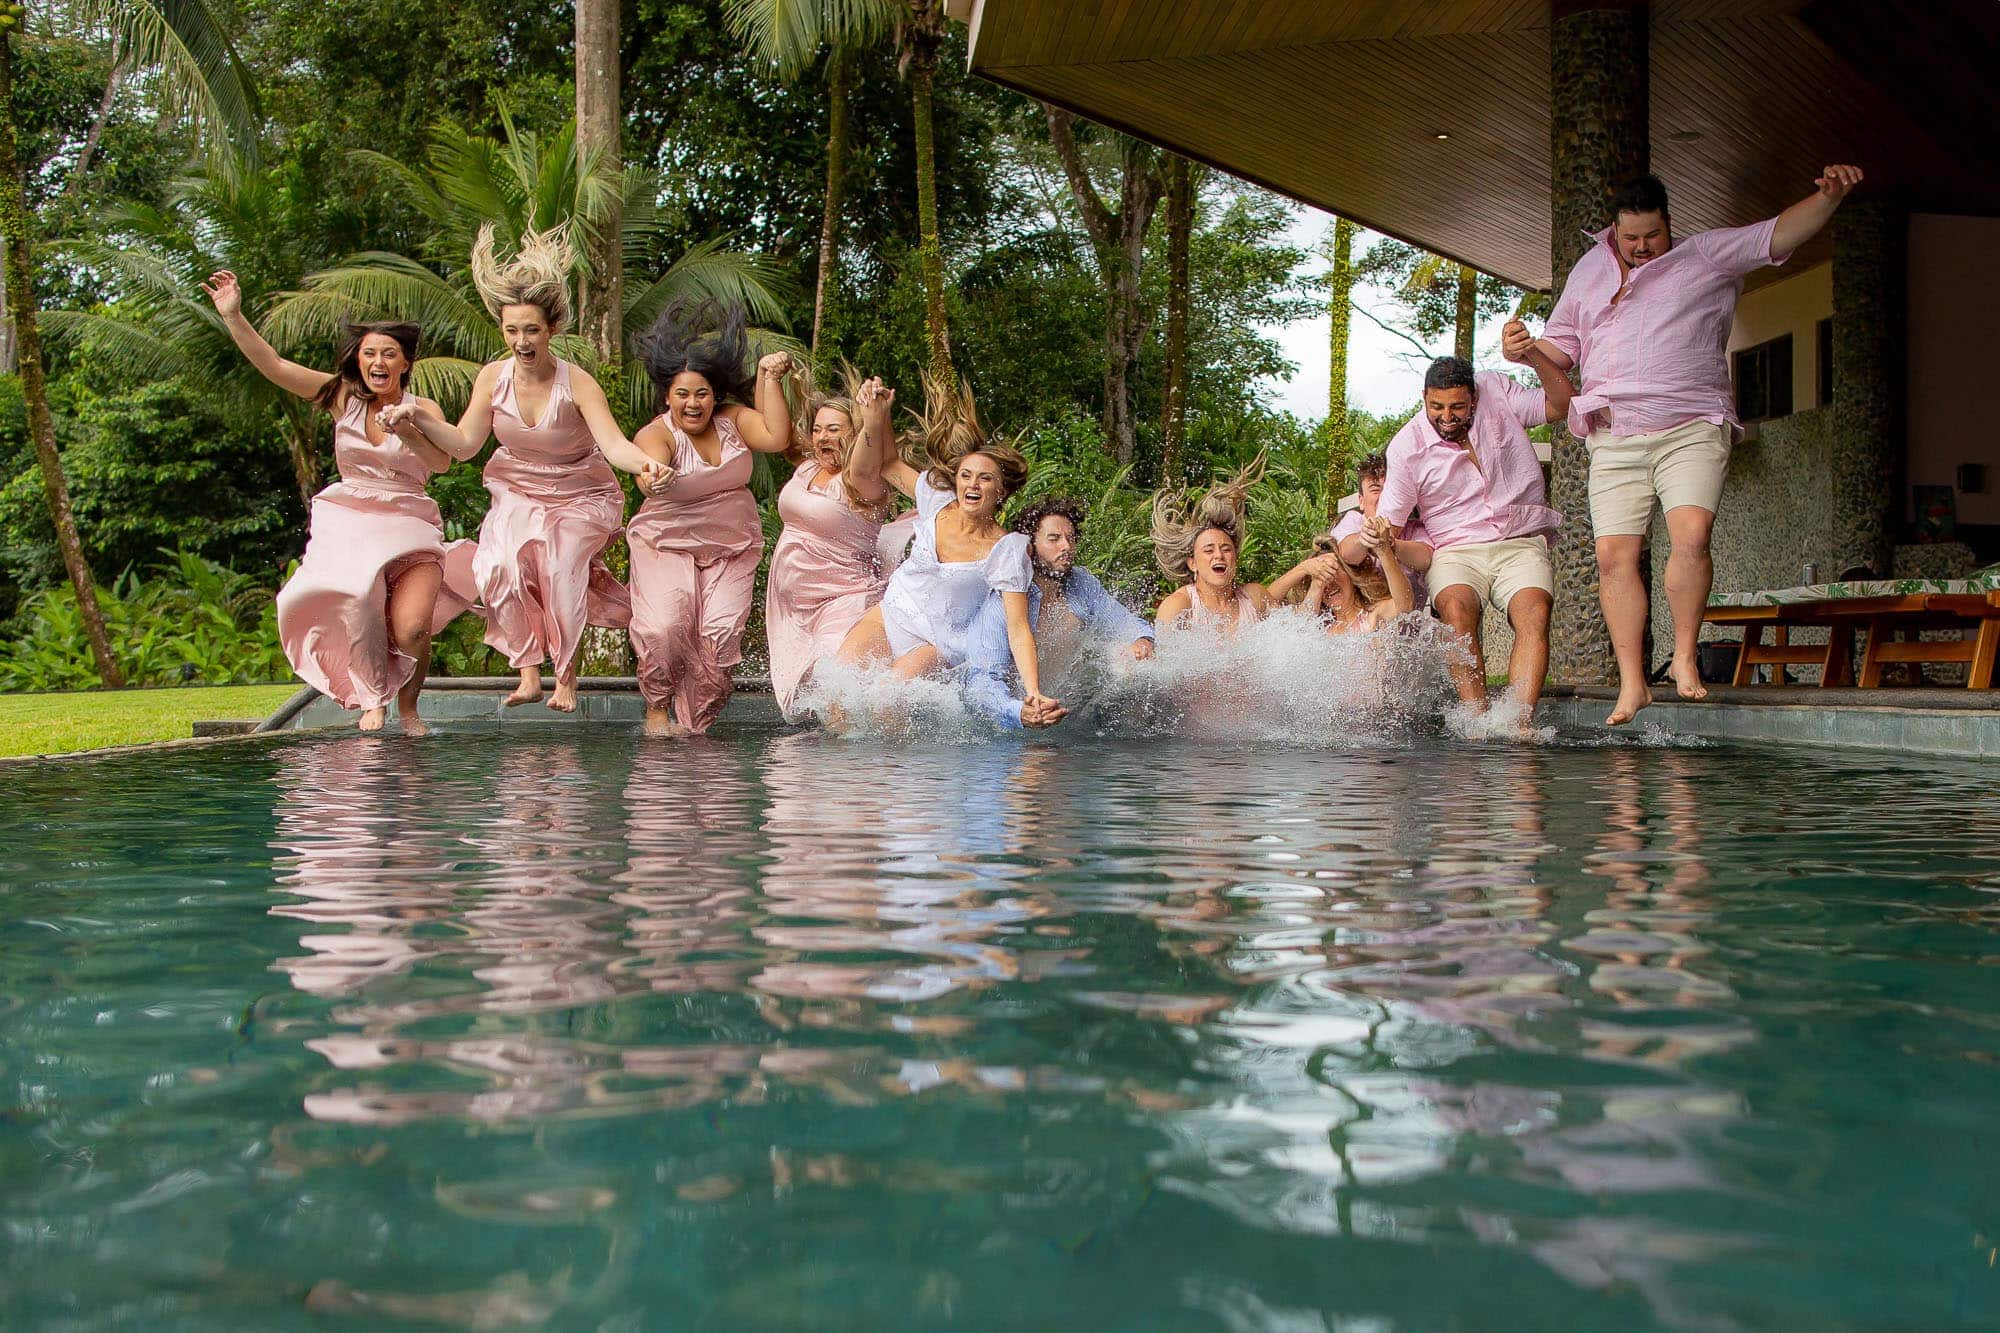 The whole wedding party jumps in the pool!